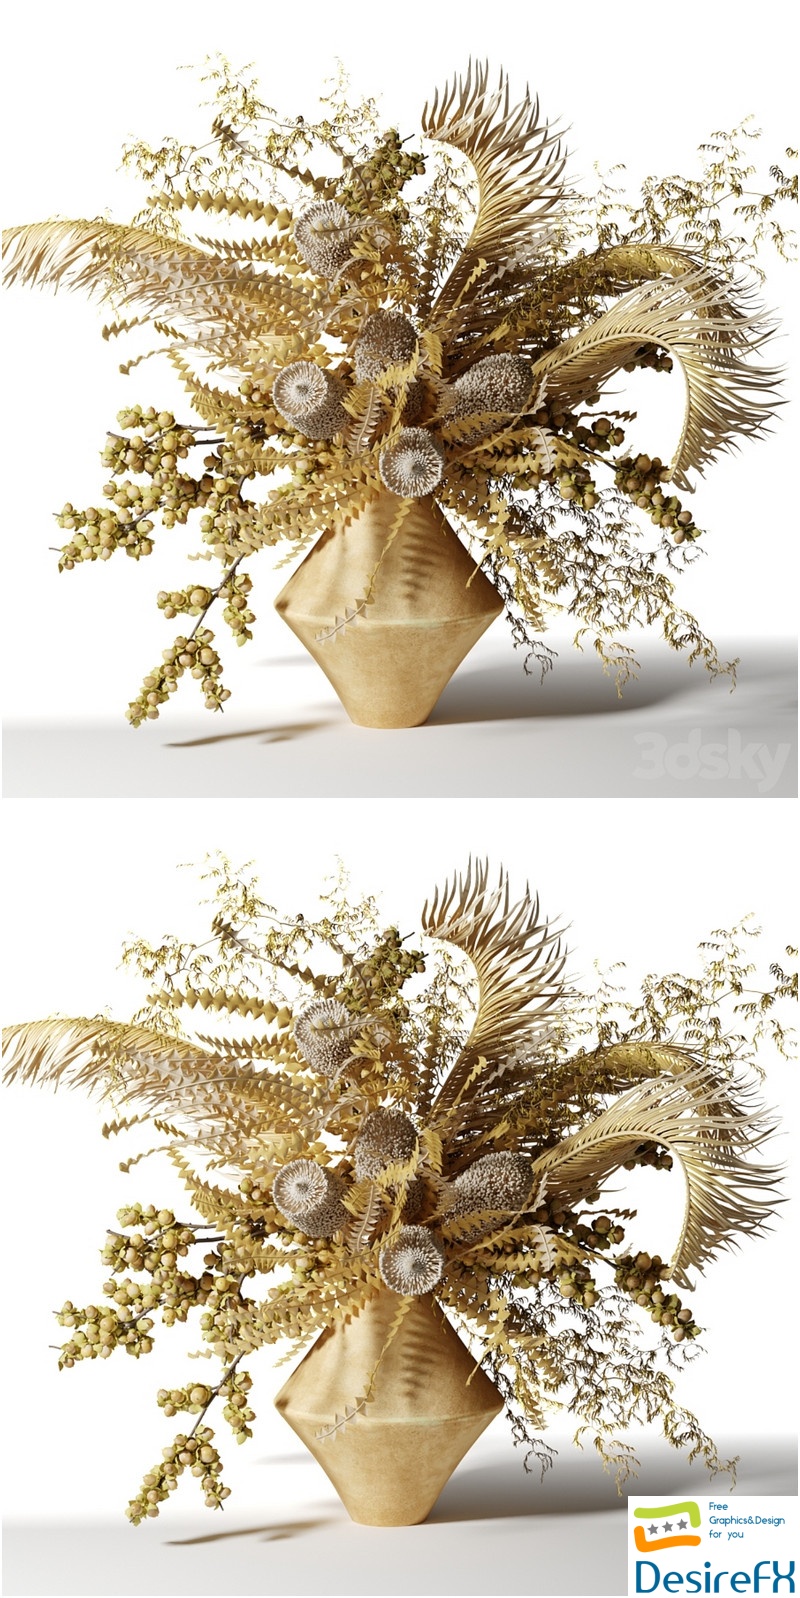 Bouquet of dried flowers with palm leaves, bankxia and walnut branches 3D Model